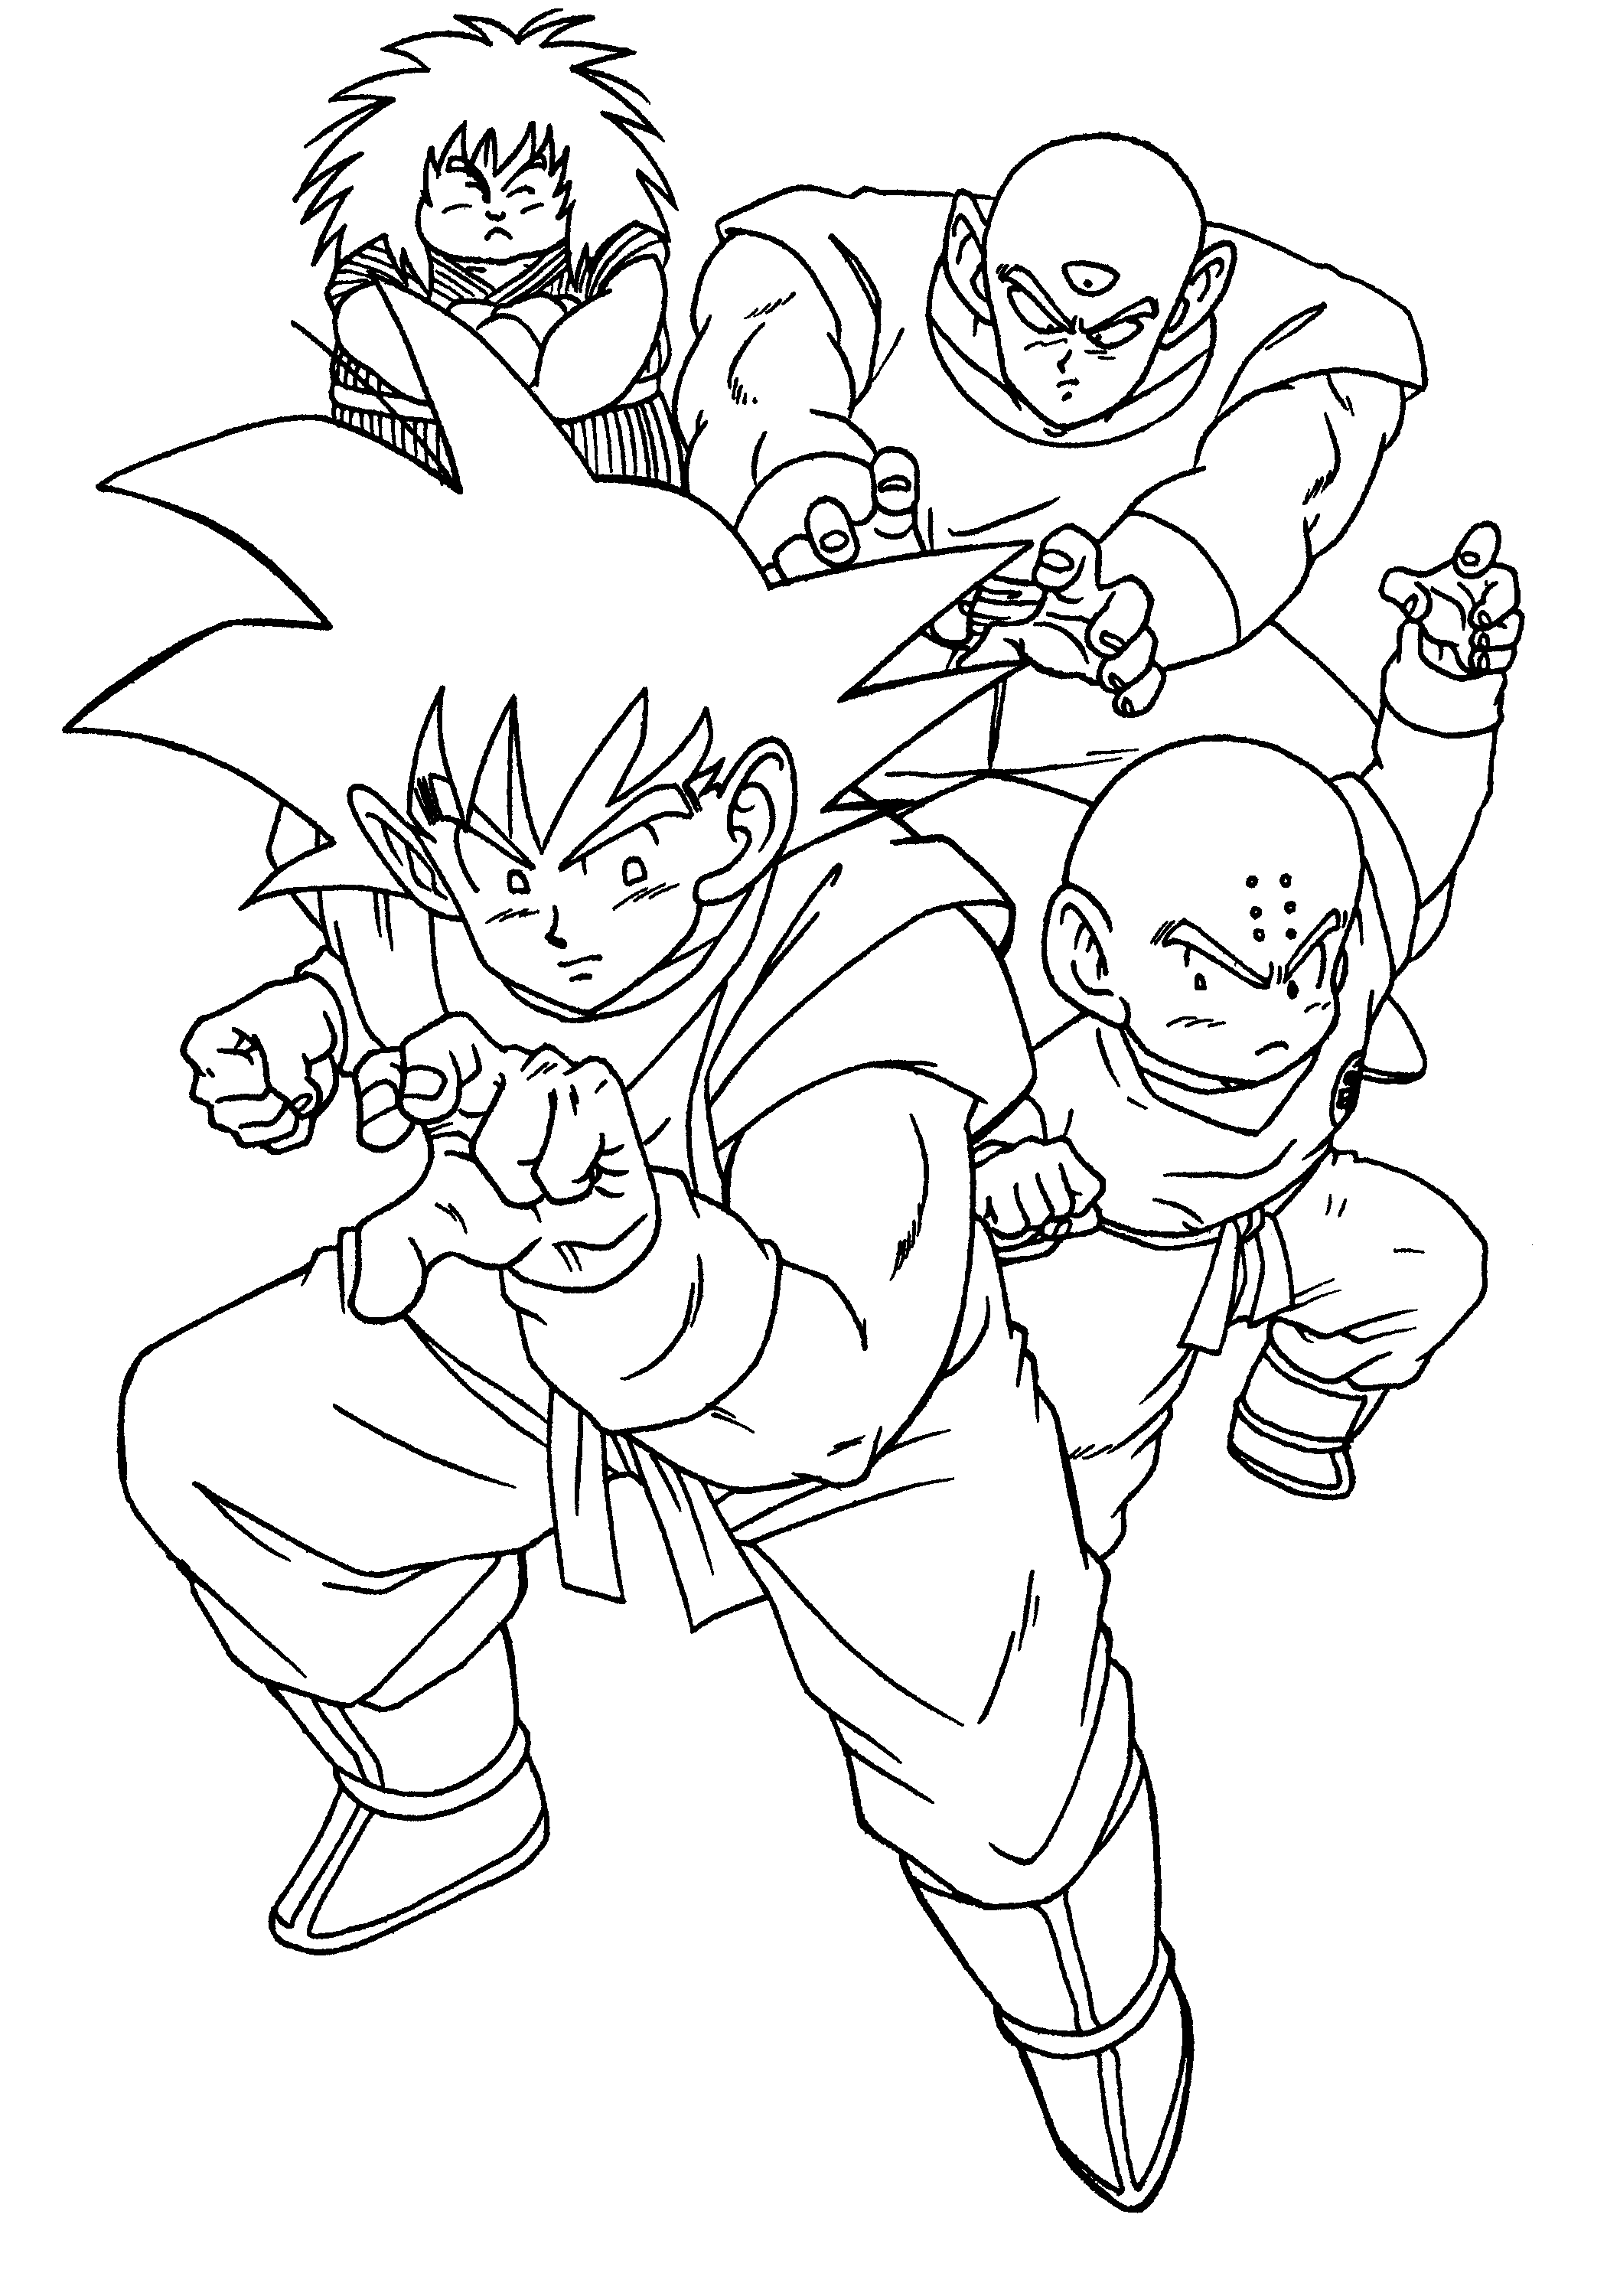 dbz colouring pages kids n funcom 55 coloring pages of dragon ball z pages dbz colouring 